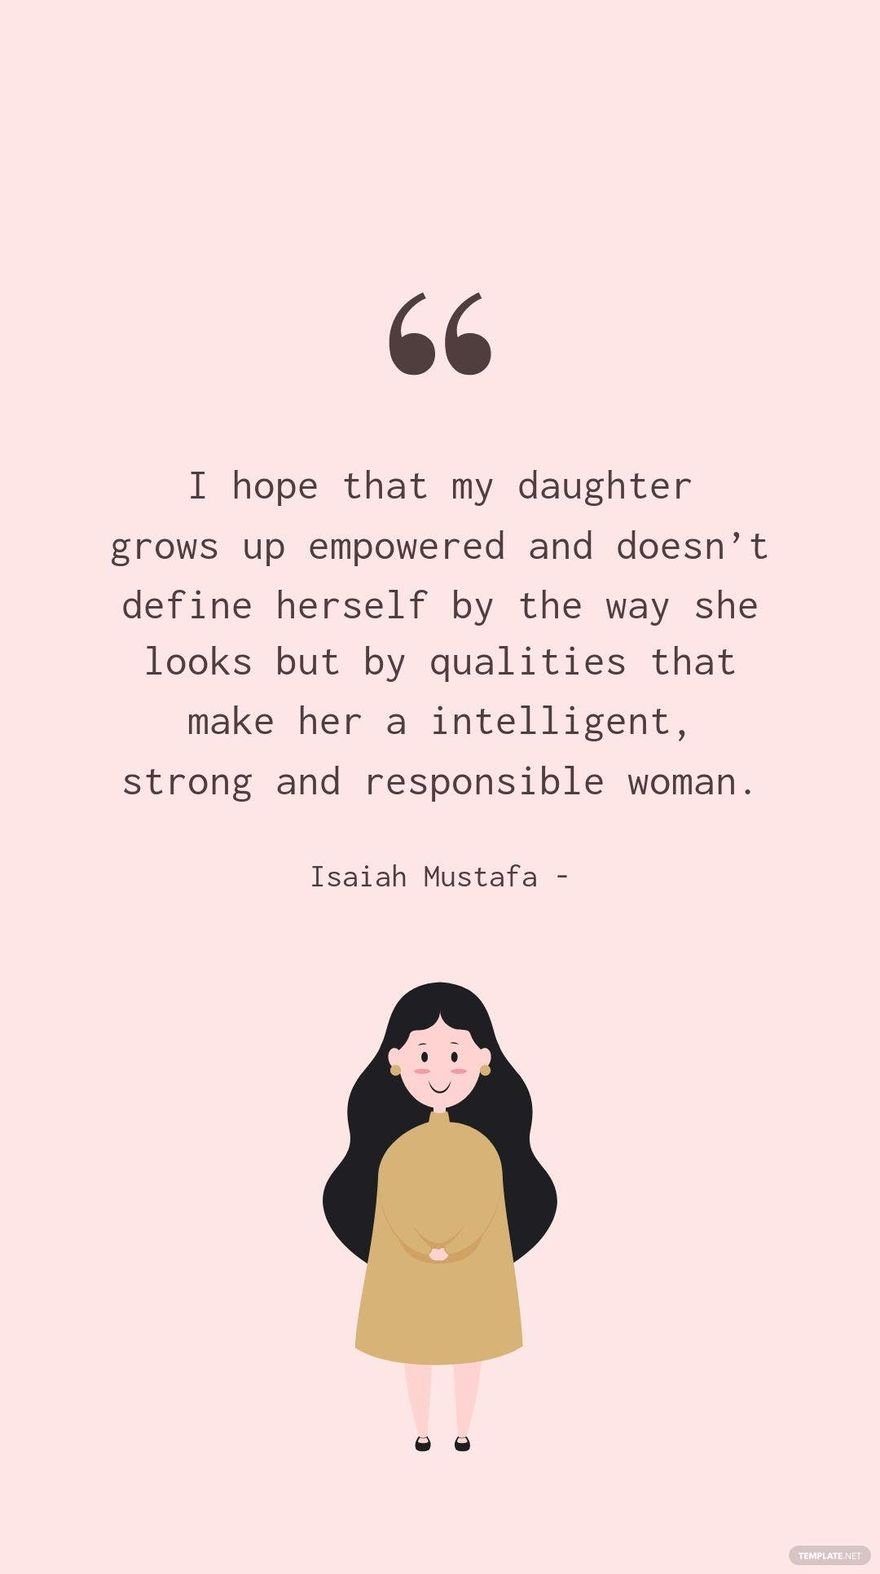 ISAIAH MUSTAFA - I hope that my daughter grows up empowered and doesn’t define herself by the way she looks but by qualities that make her a intelligent, strong and responsible woman.